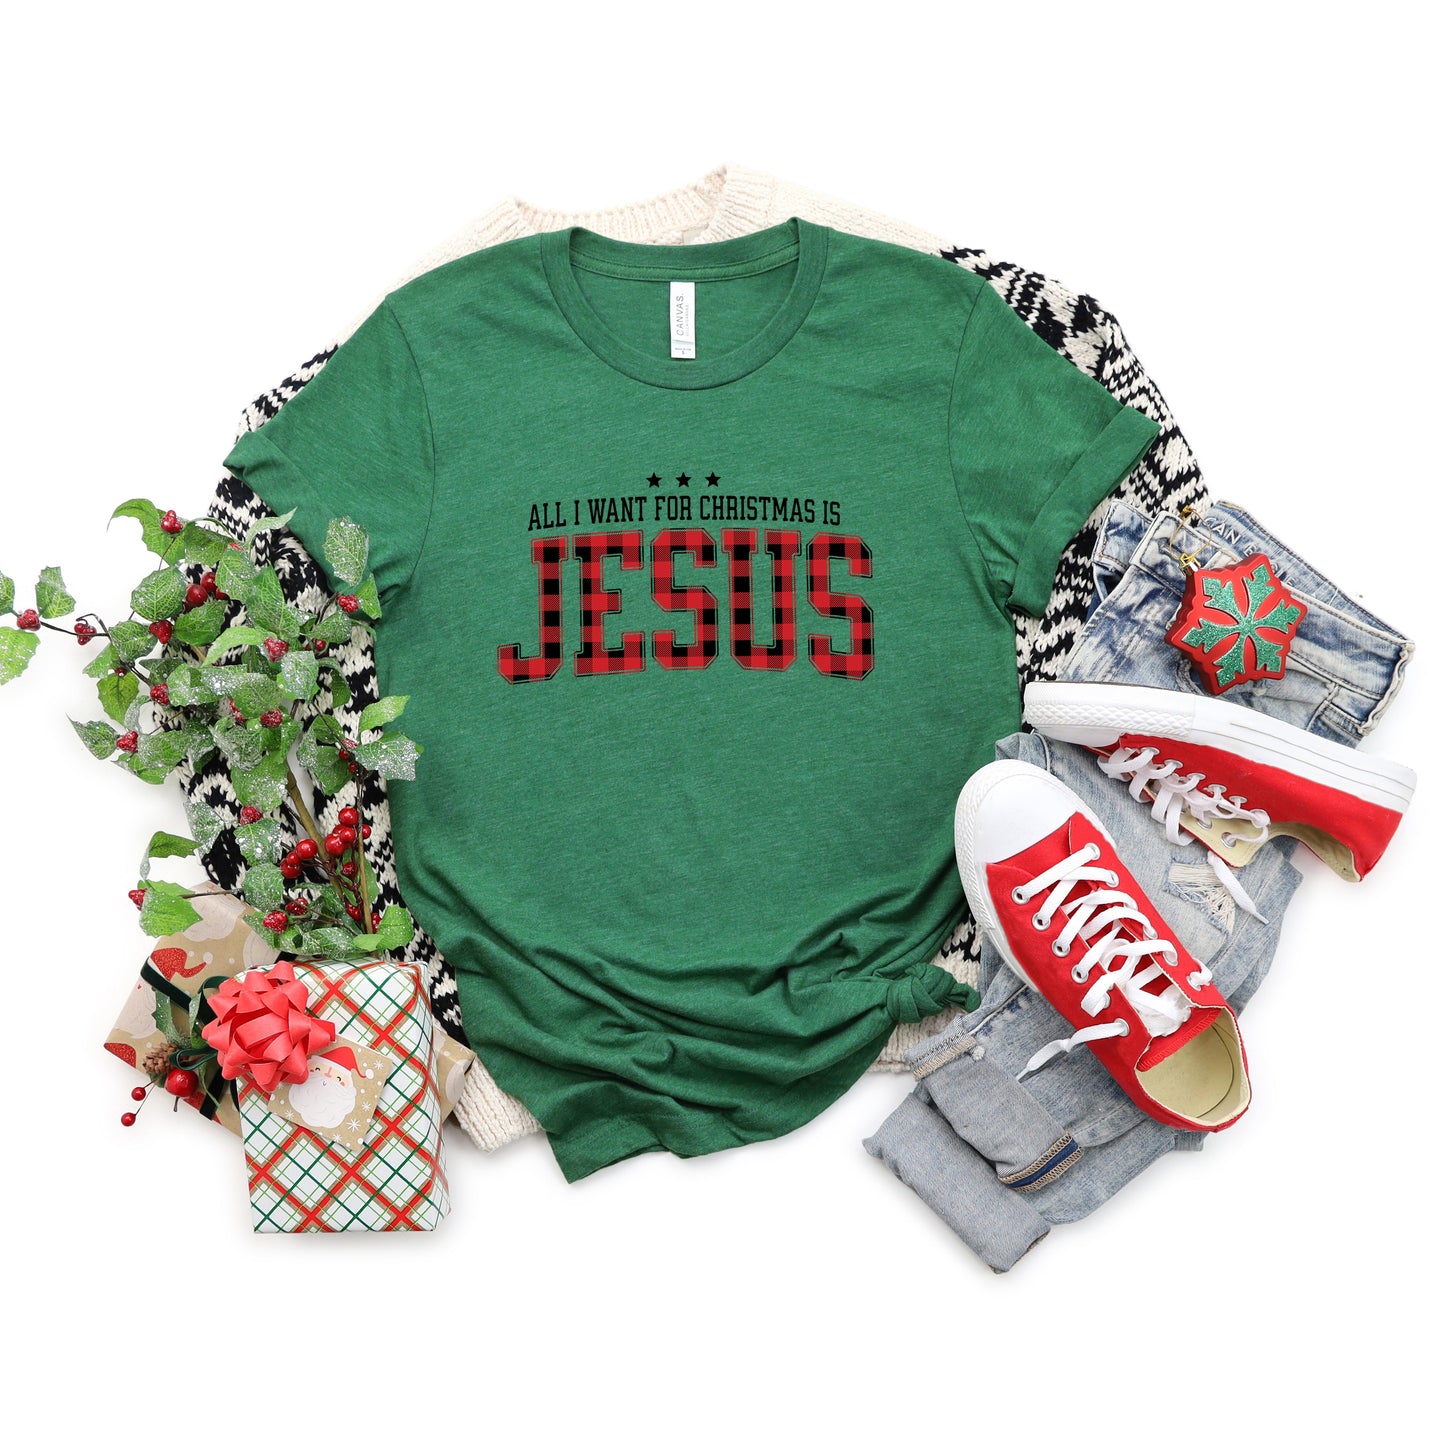 All I Want For Christmas Is Jesus | Short Sleeve Crew Neck